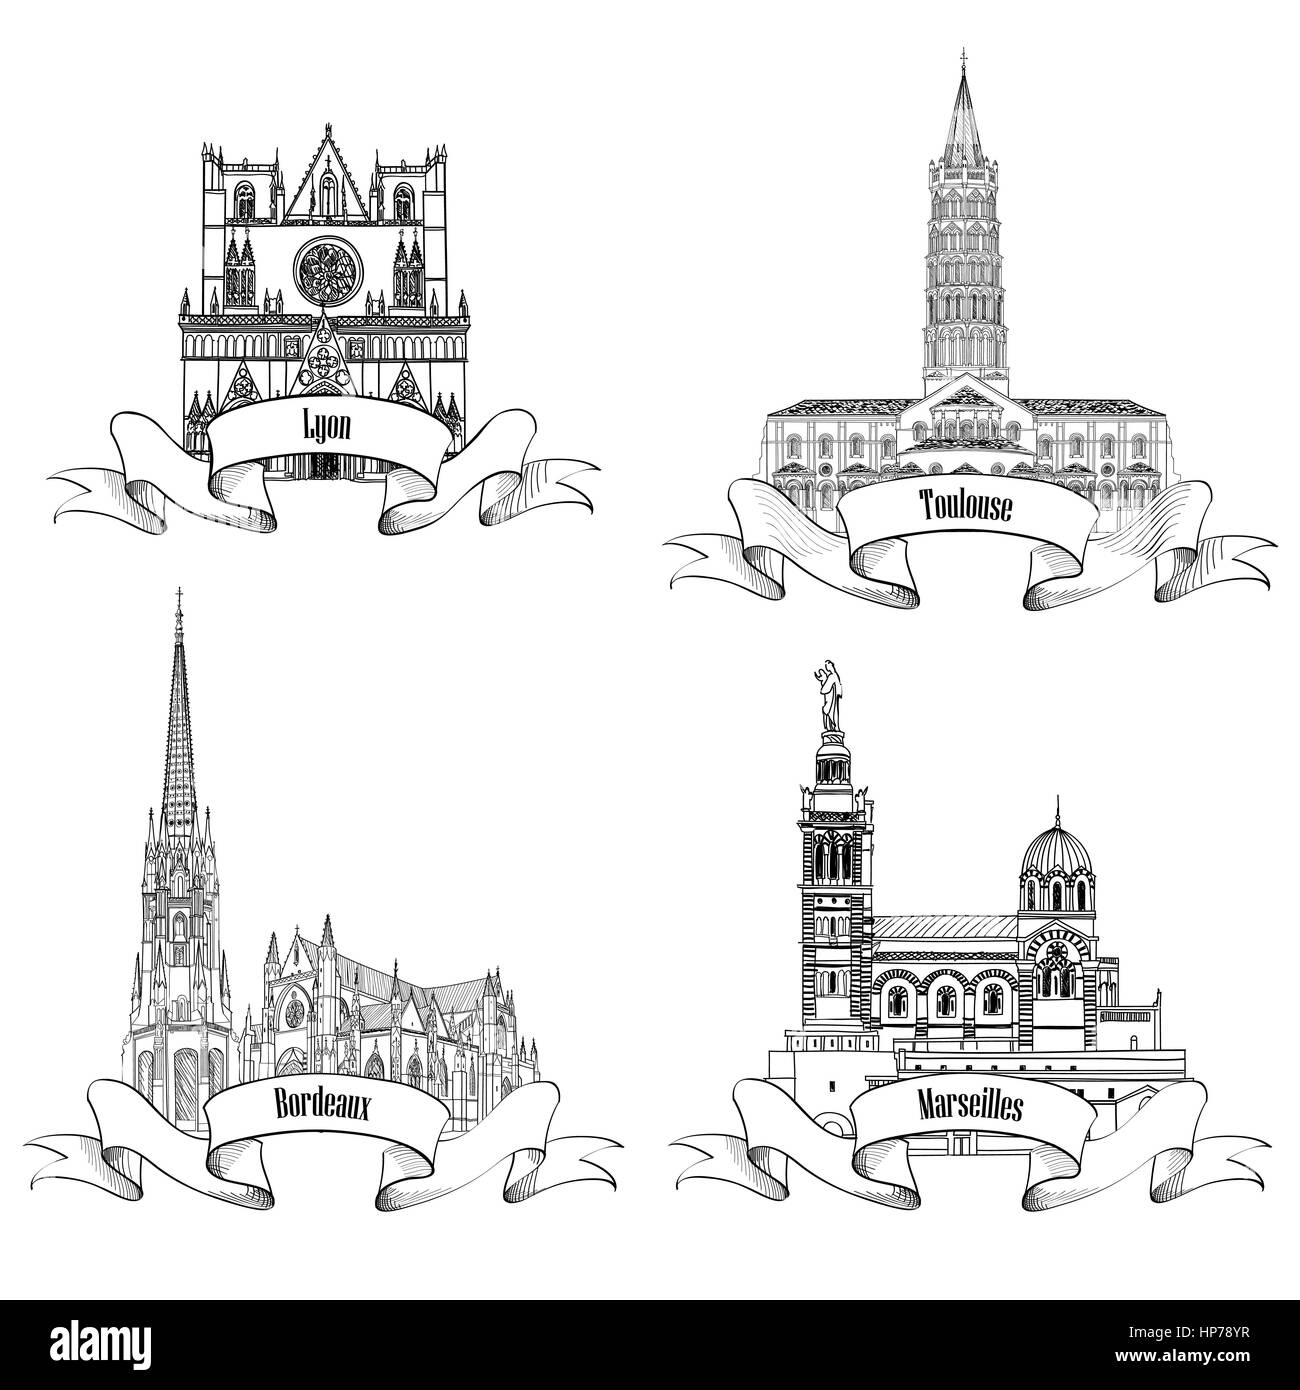 French famous buildings and landmarks. Hand drawn French city label set. Roman architecture. Travel France symbol collection. Bordeaux, Toulouse, Lyon Stock Vector